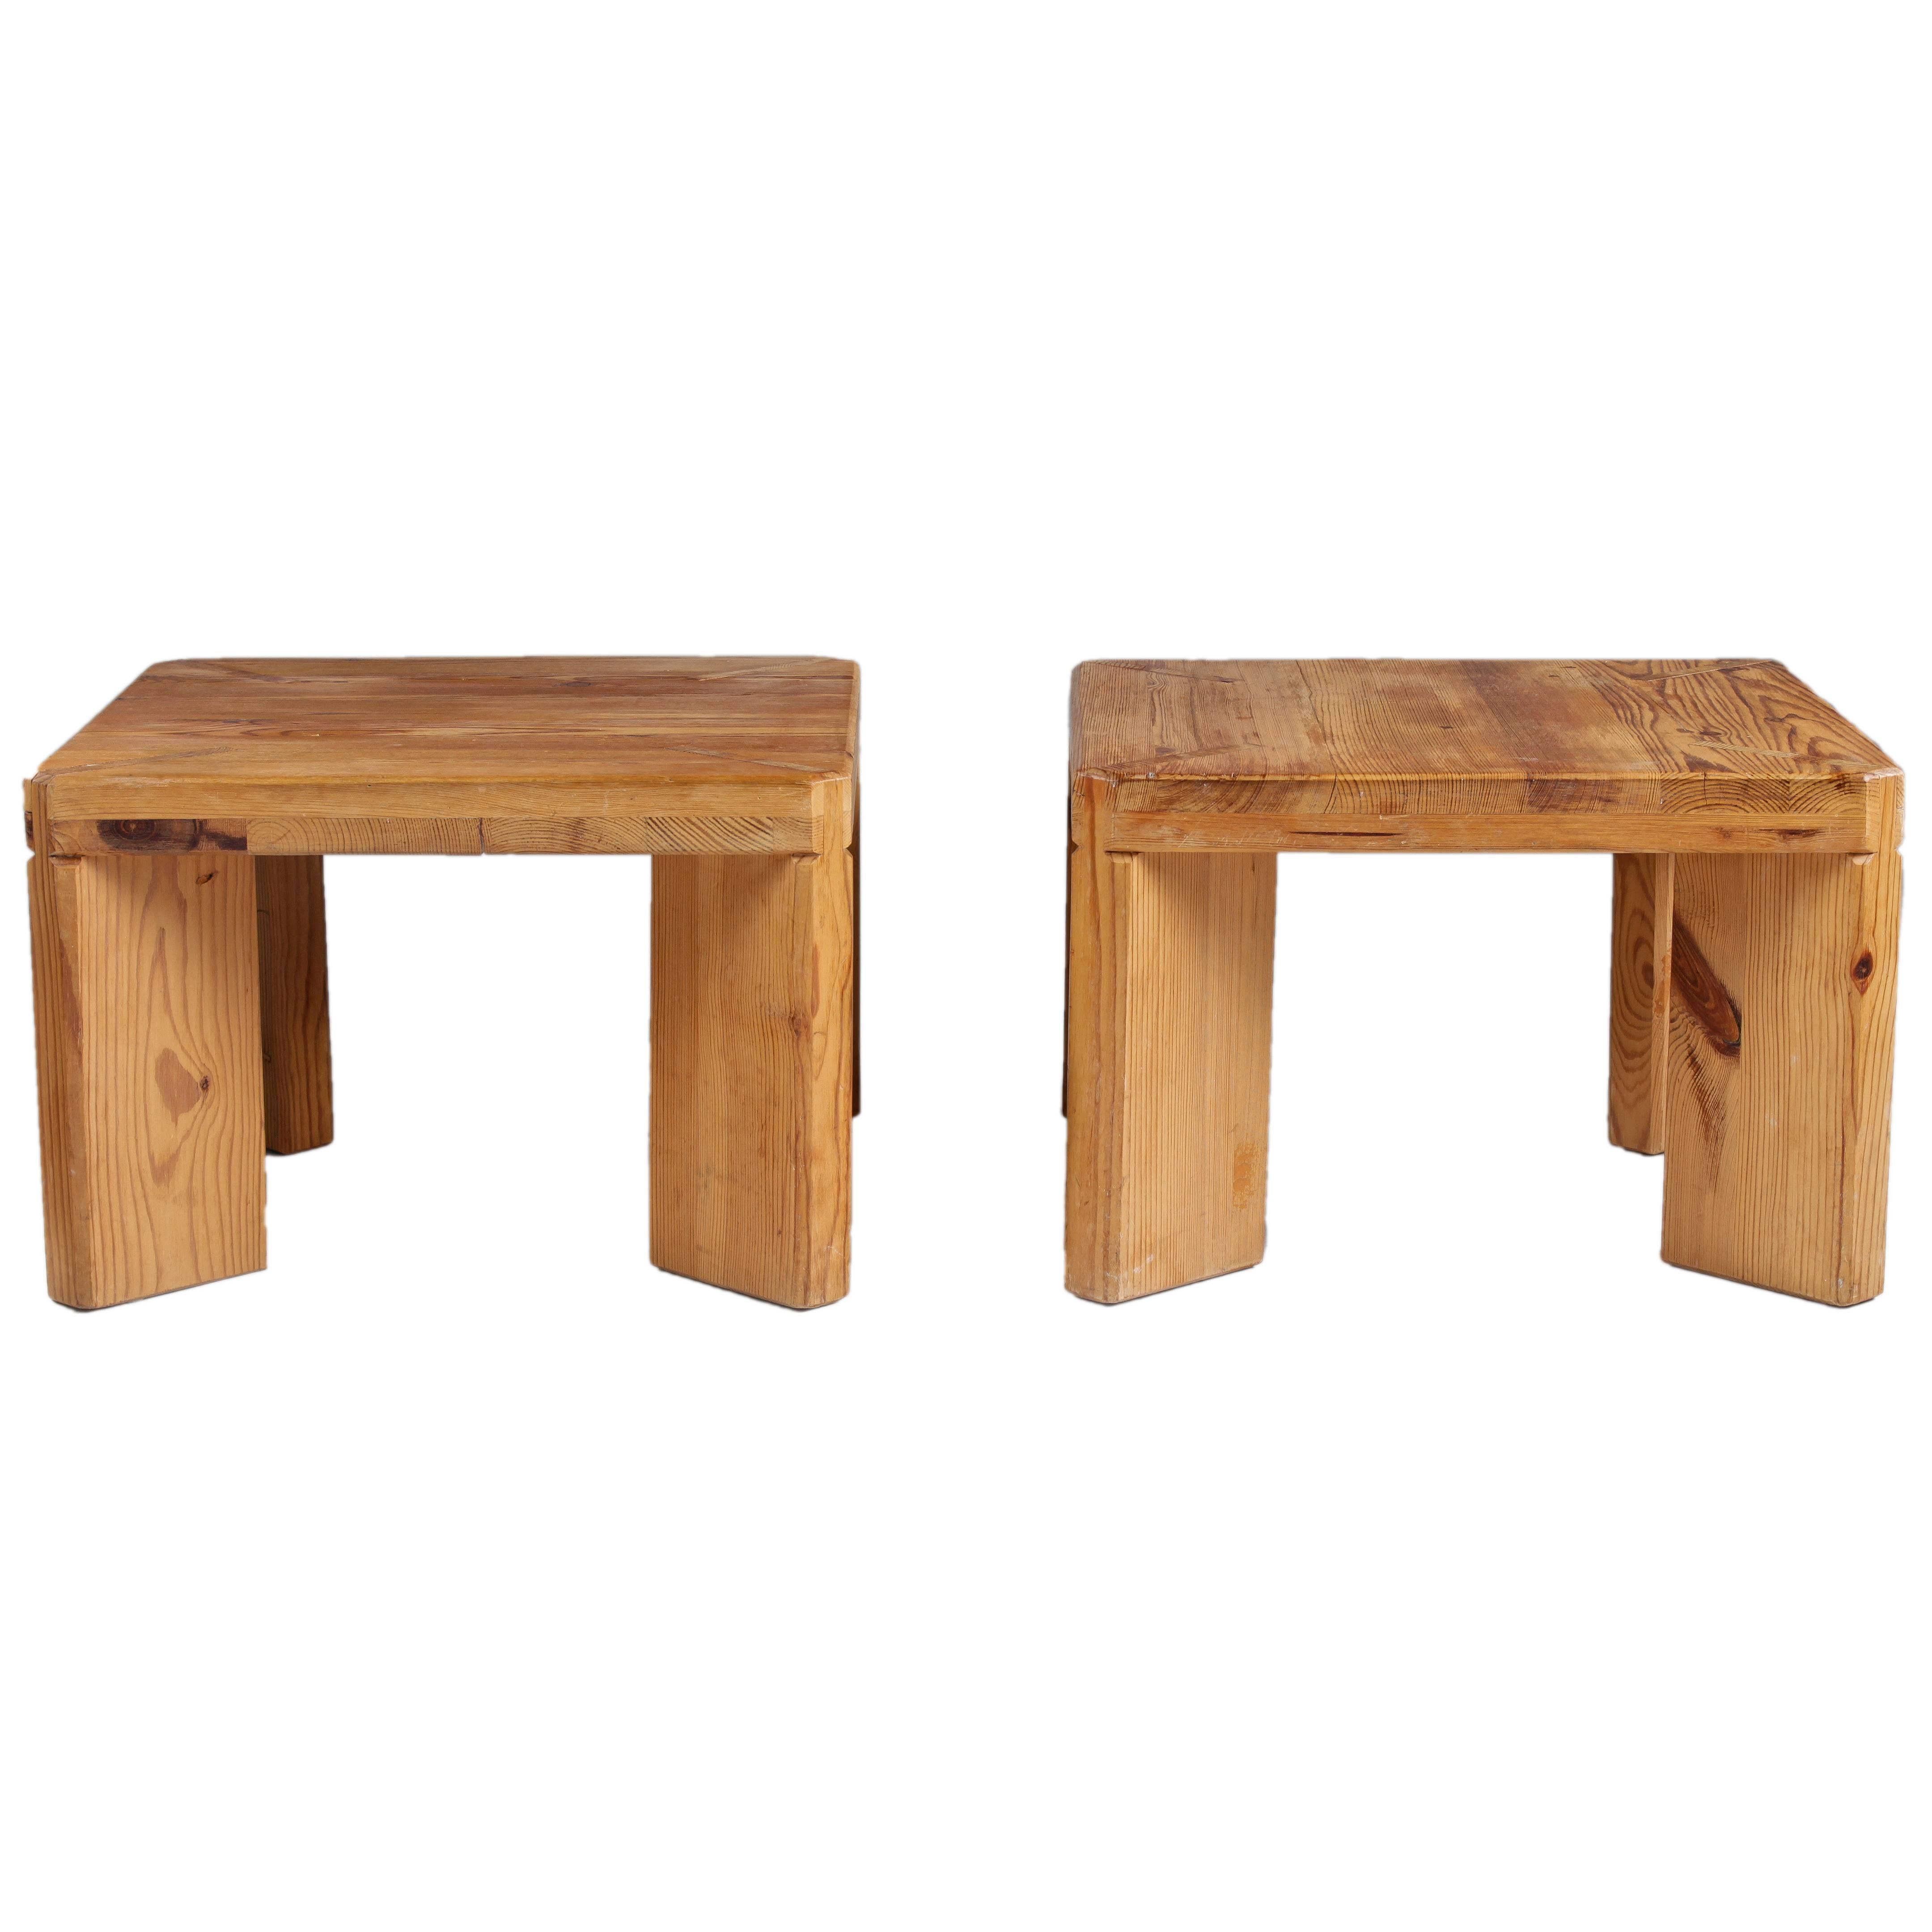 Rare Stools or Side Tables by Roland Williamsson, 1969